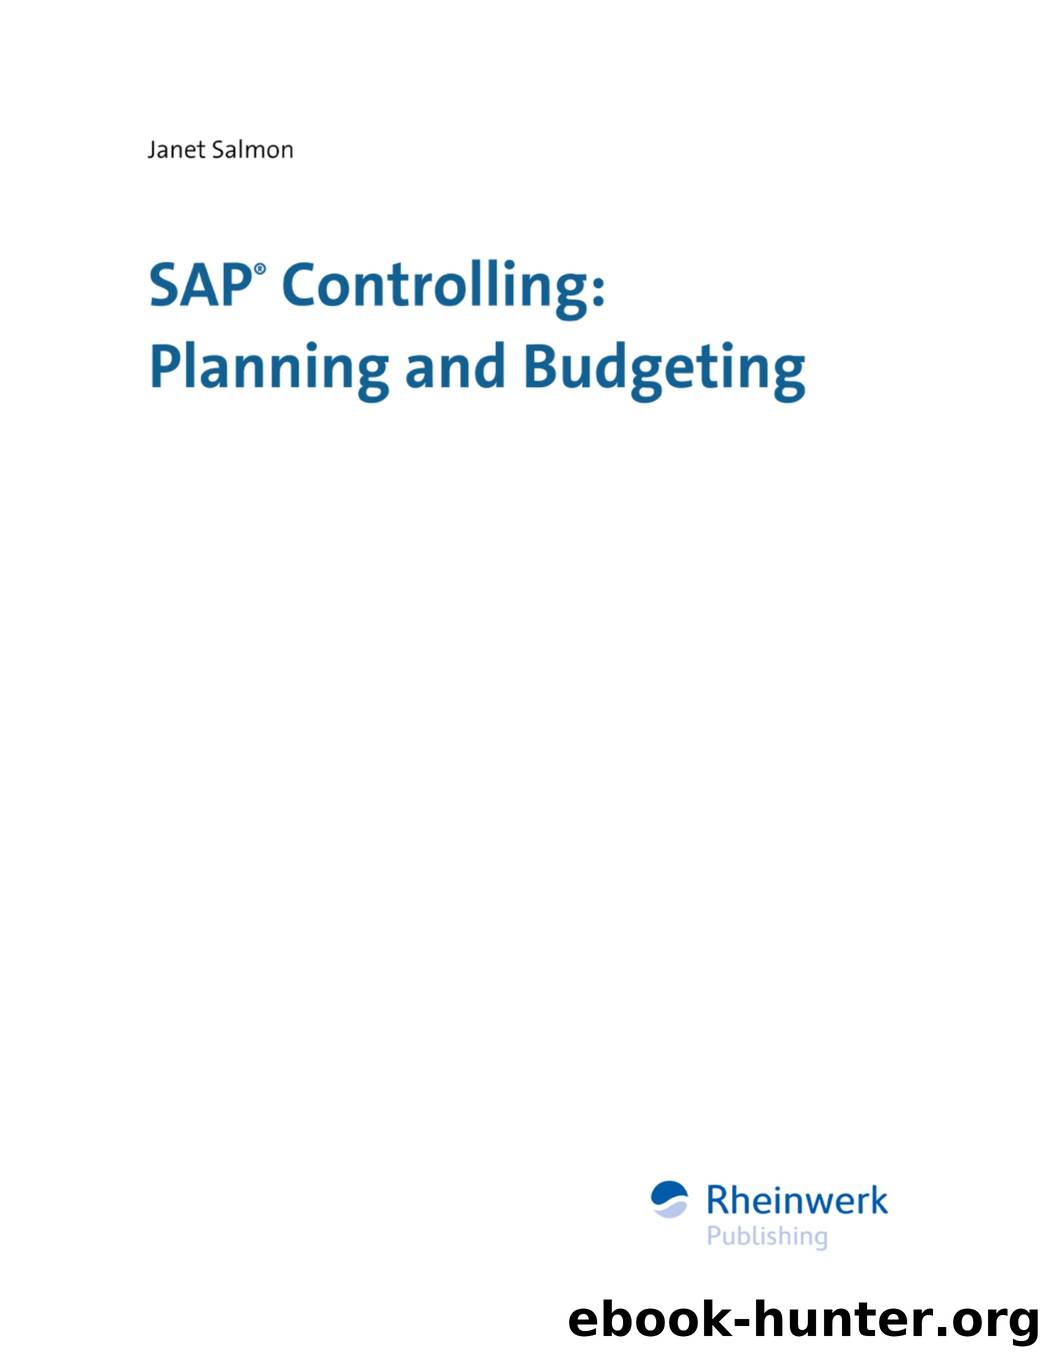 SAP Controlling by Planning & Budgeting